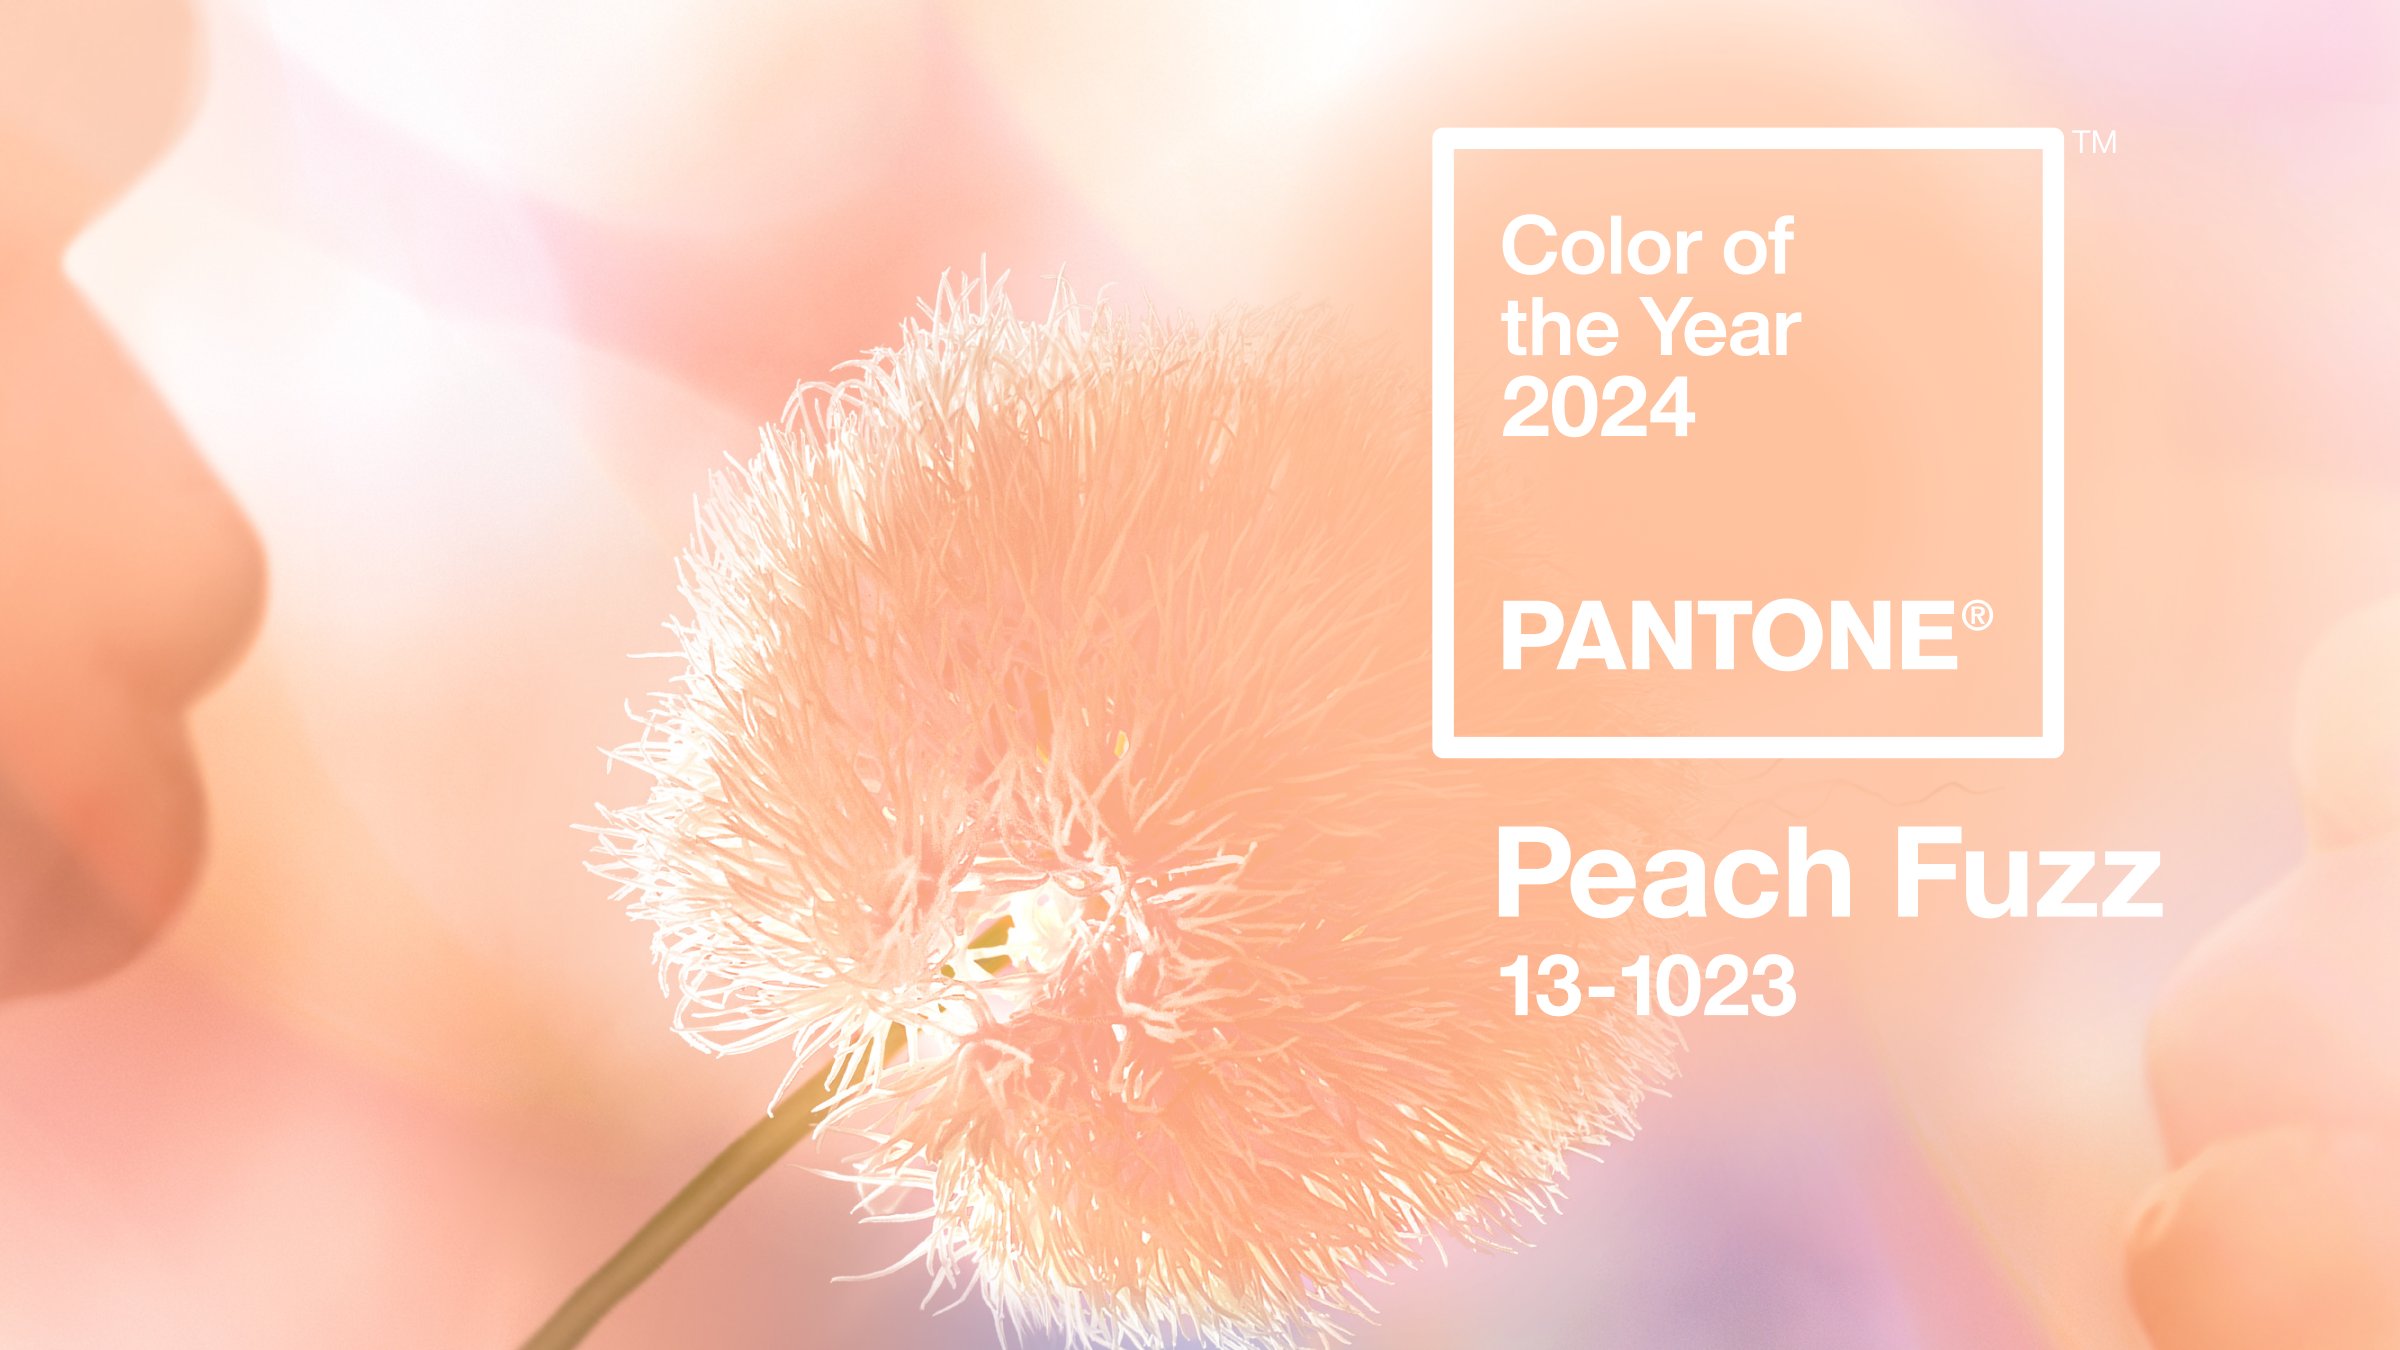 Pantone Selects Peach Fuzz as its 2024 Color of the Year